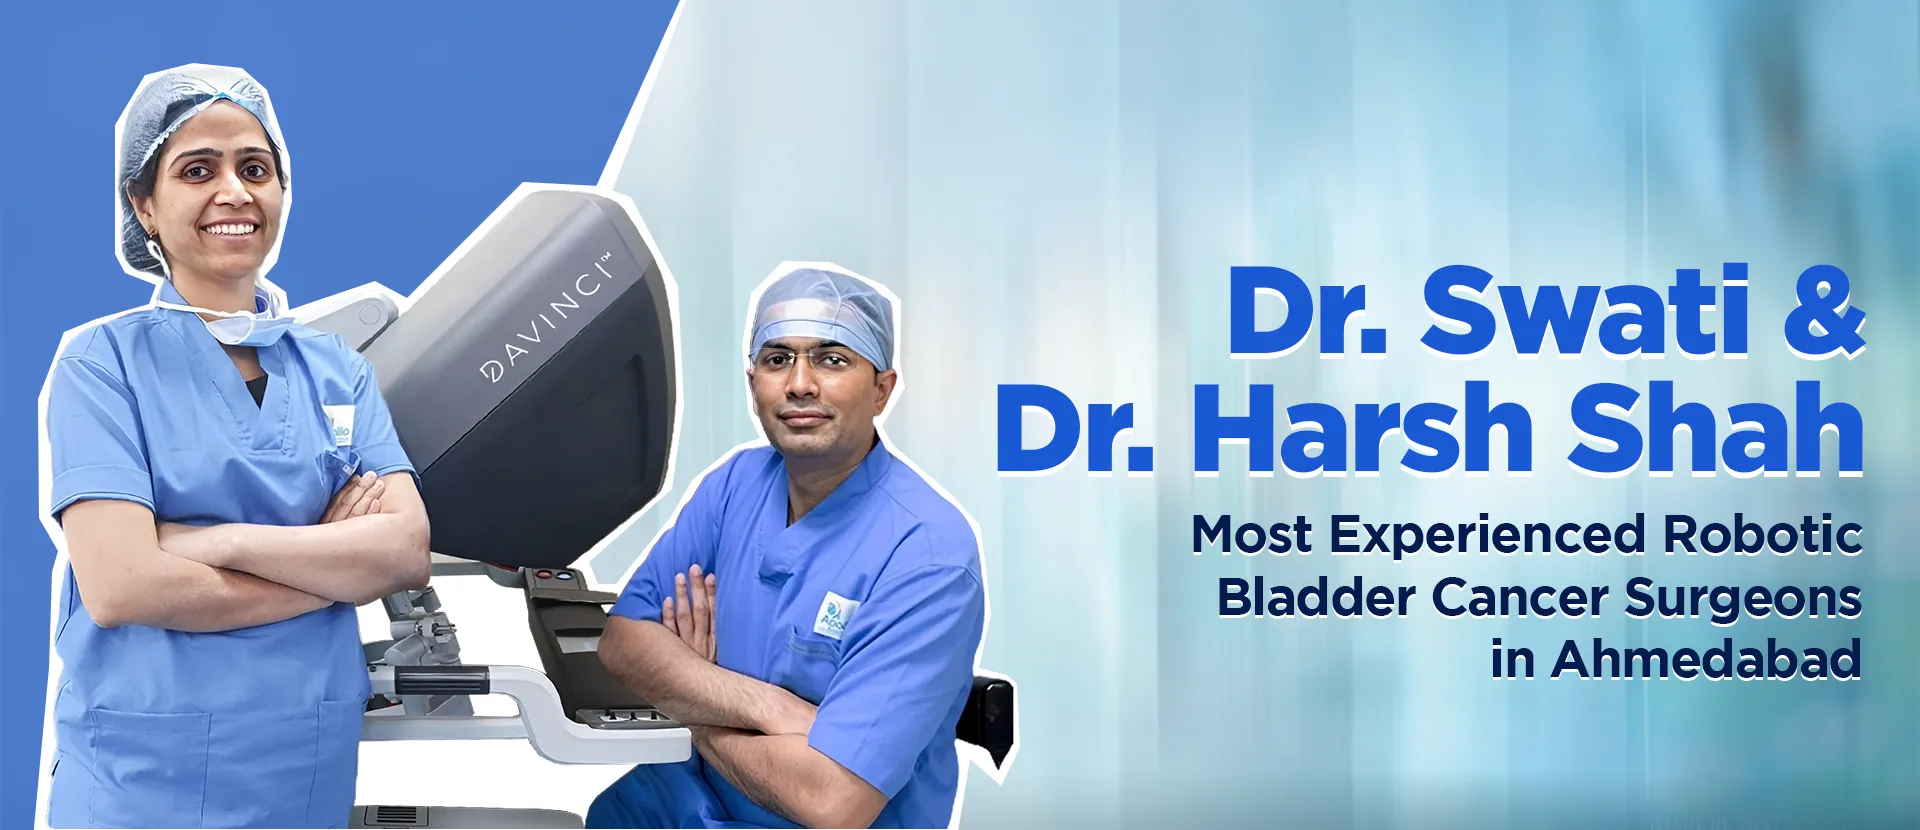 Best Urinary Bladder cancer Treatment with Robotic Surgery in Ahmedabad, Gujarat, India